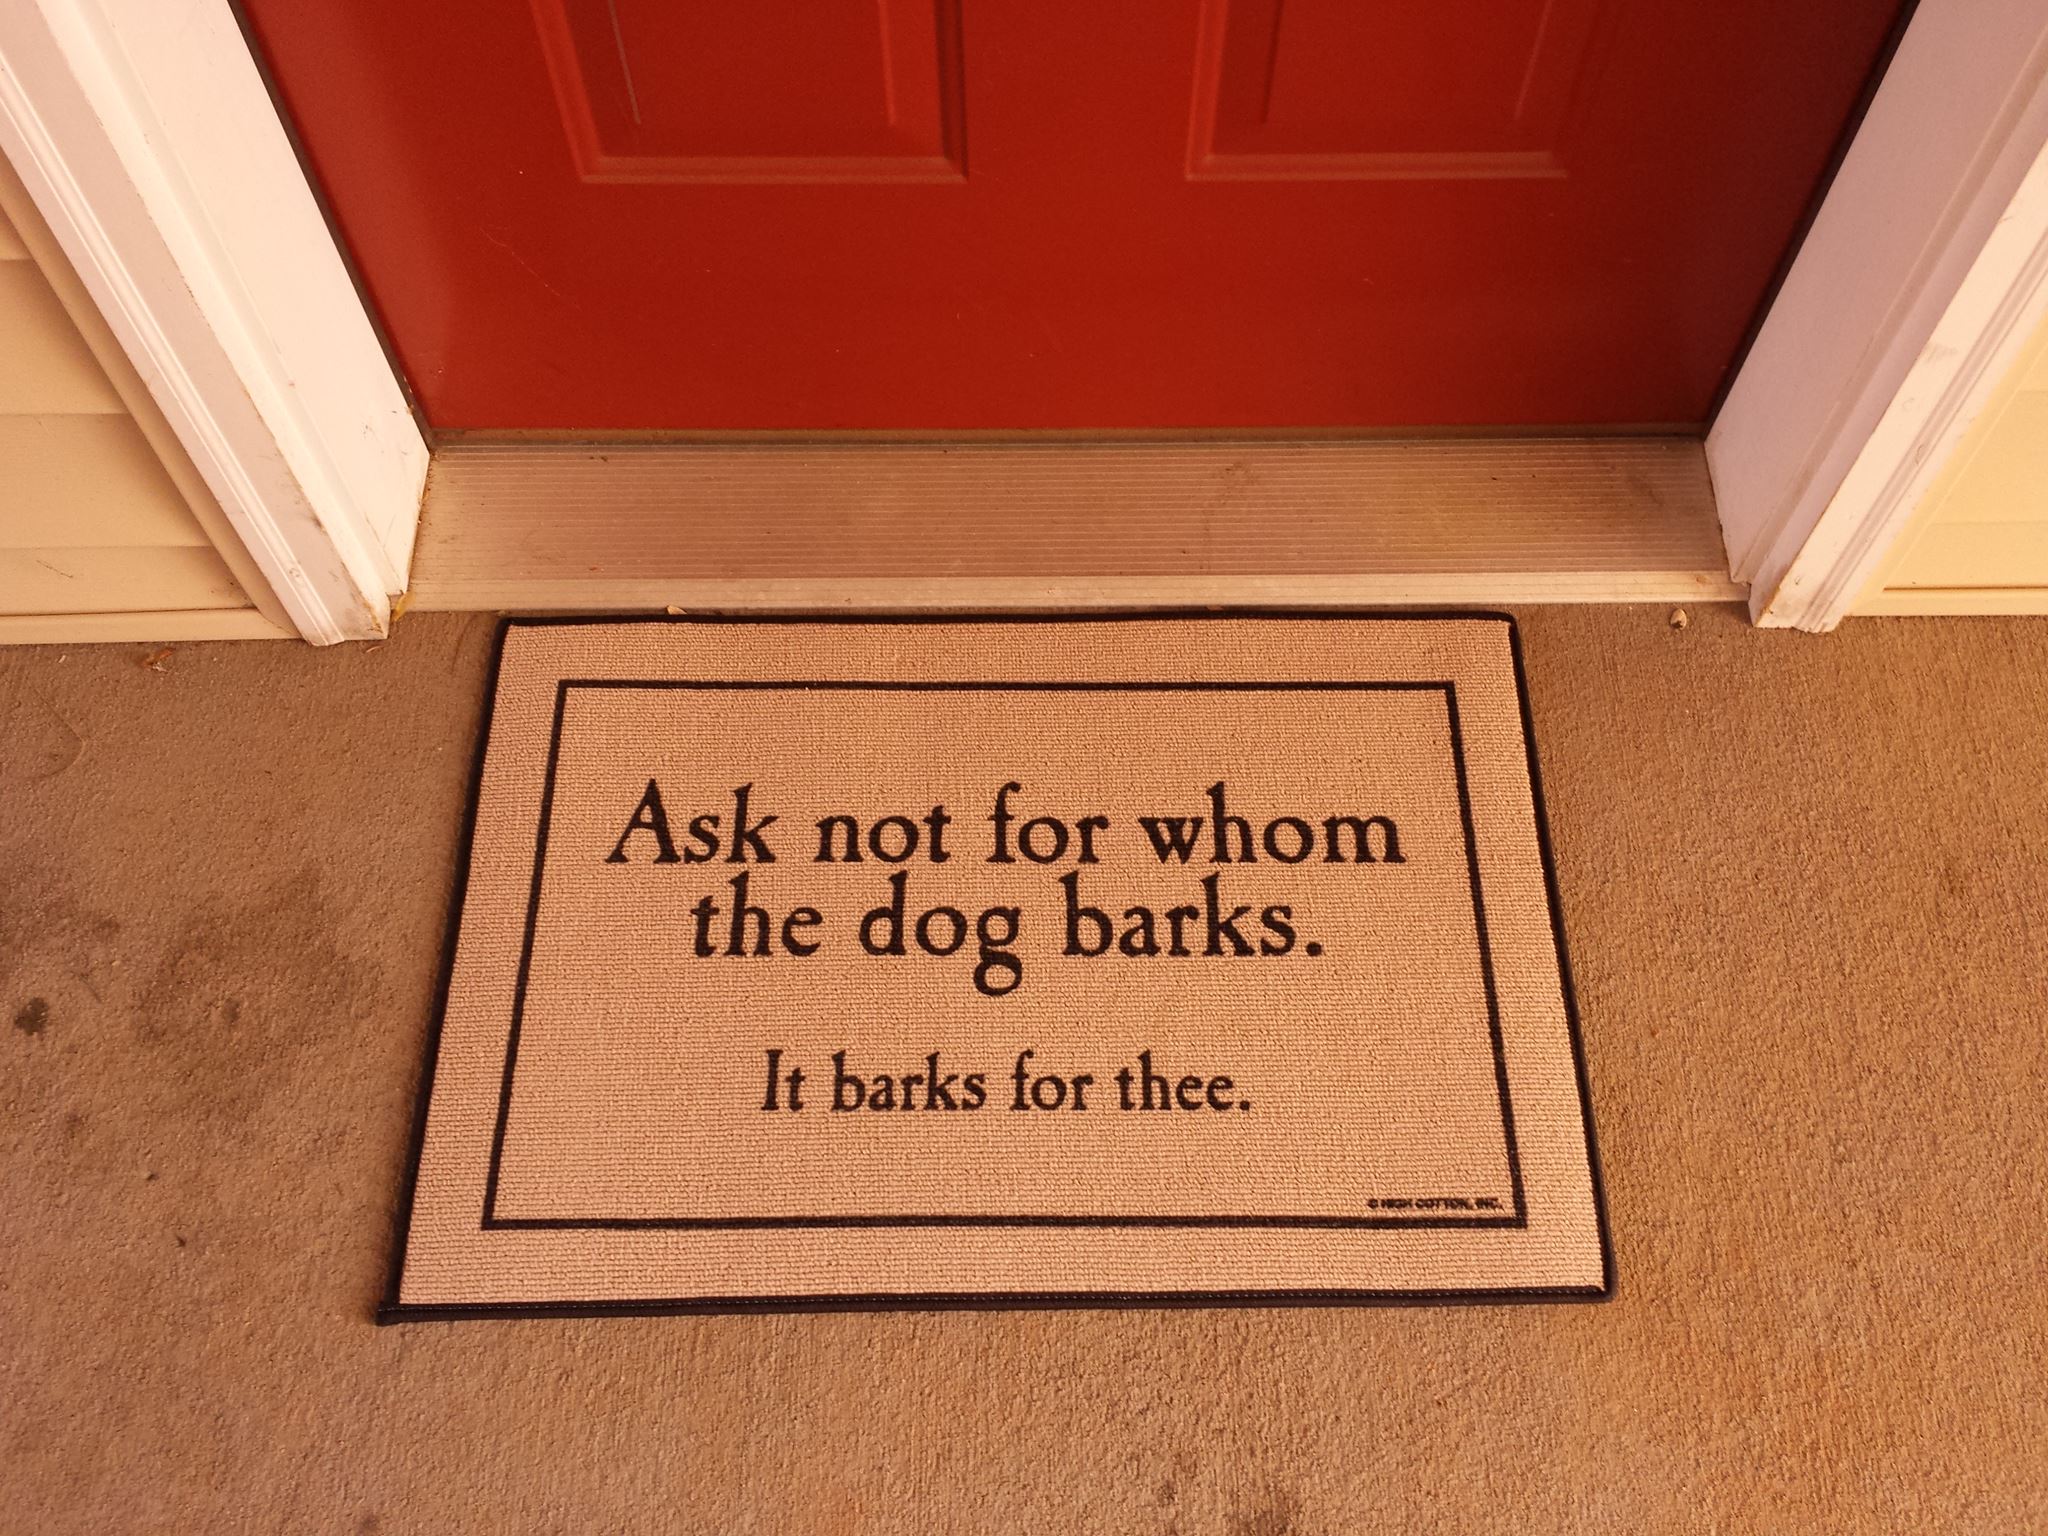 ask not for whom the dog barks sign - Ask not for whom the dog barks. It barks for thee.